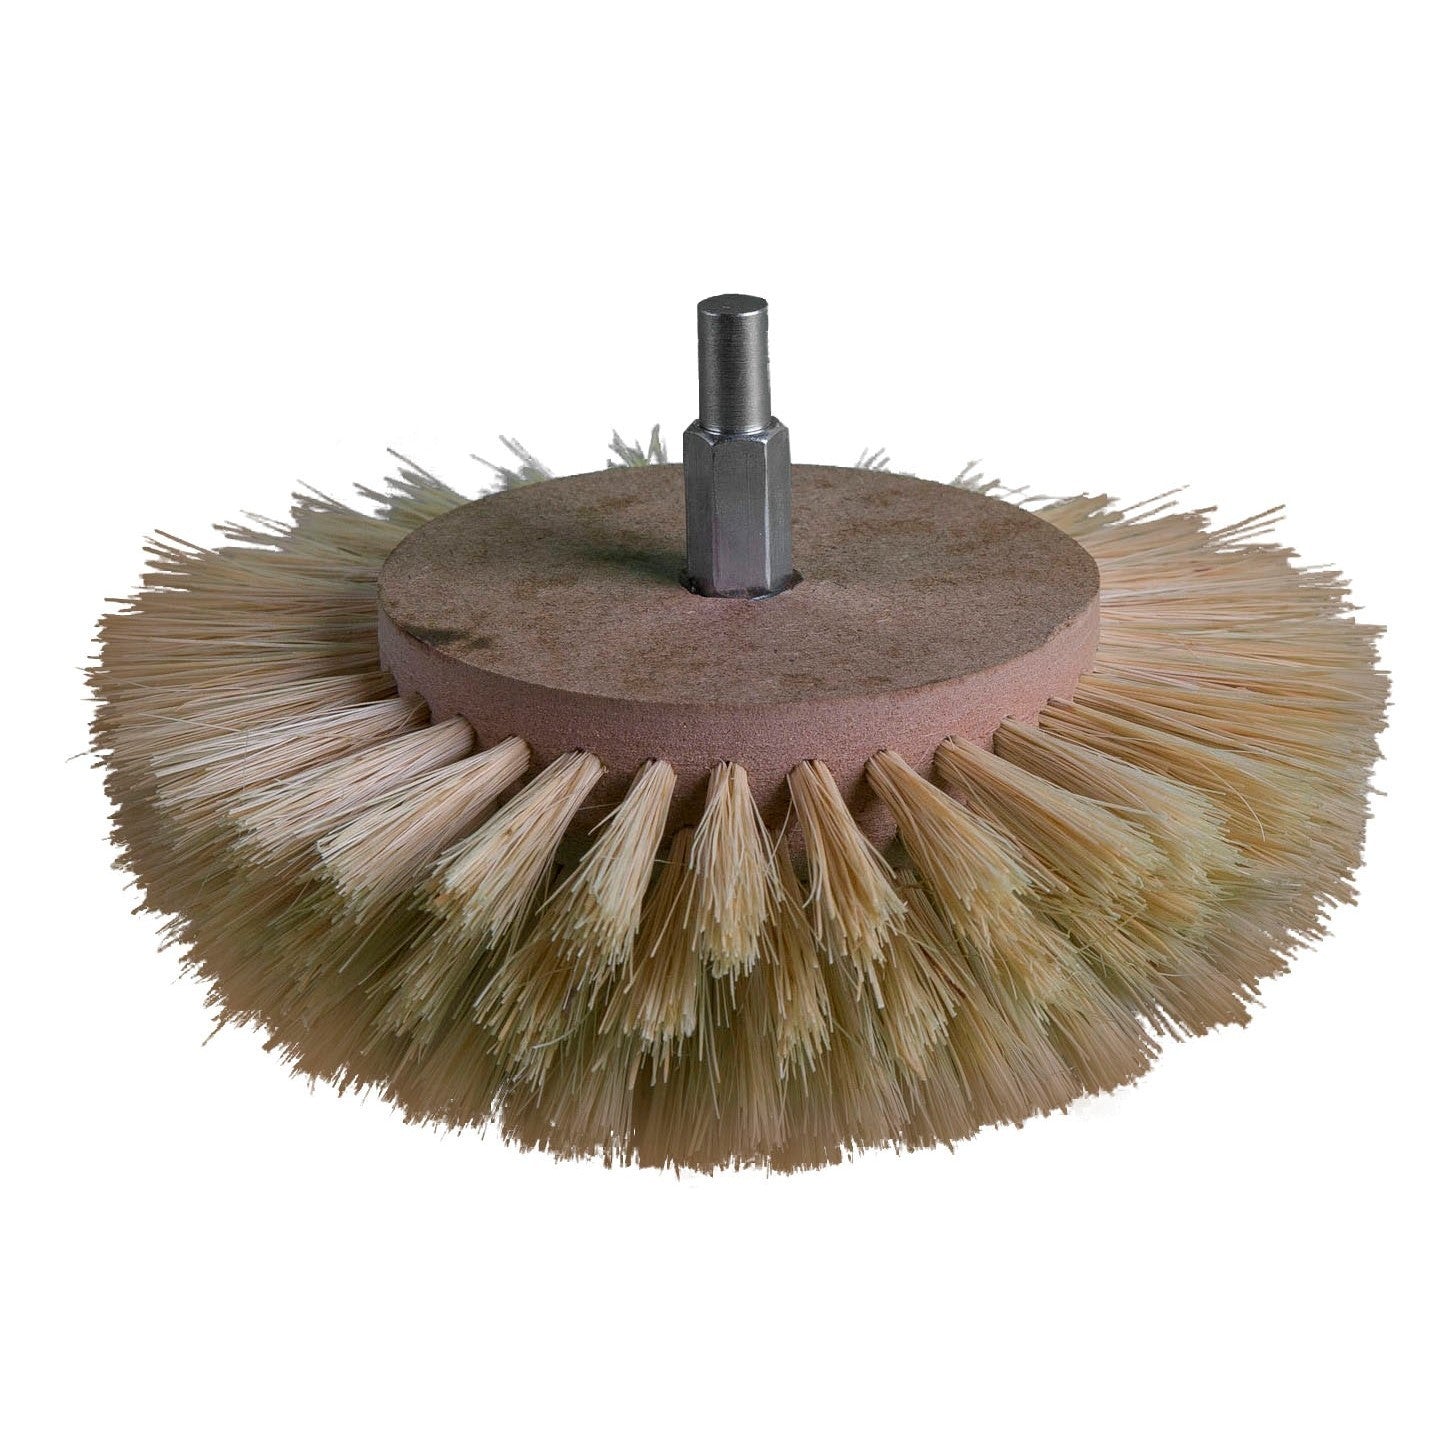 Chestnut Products Dome Brush | Woodturning & Woodworking